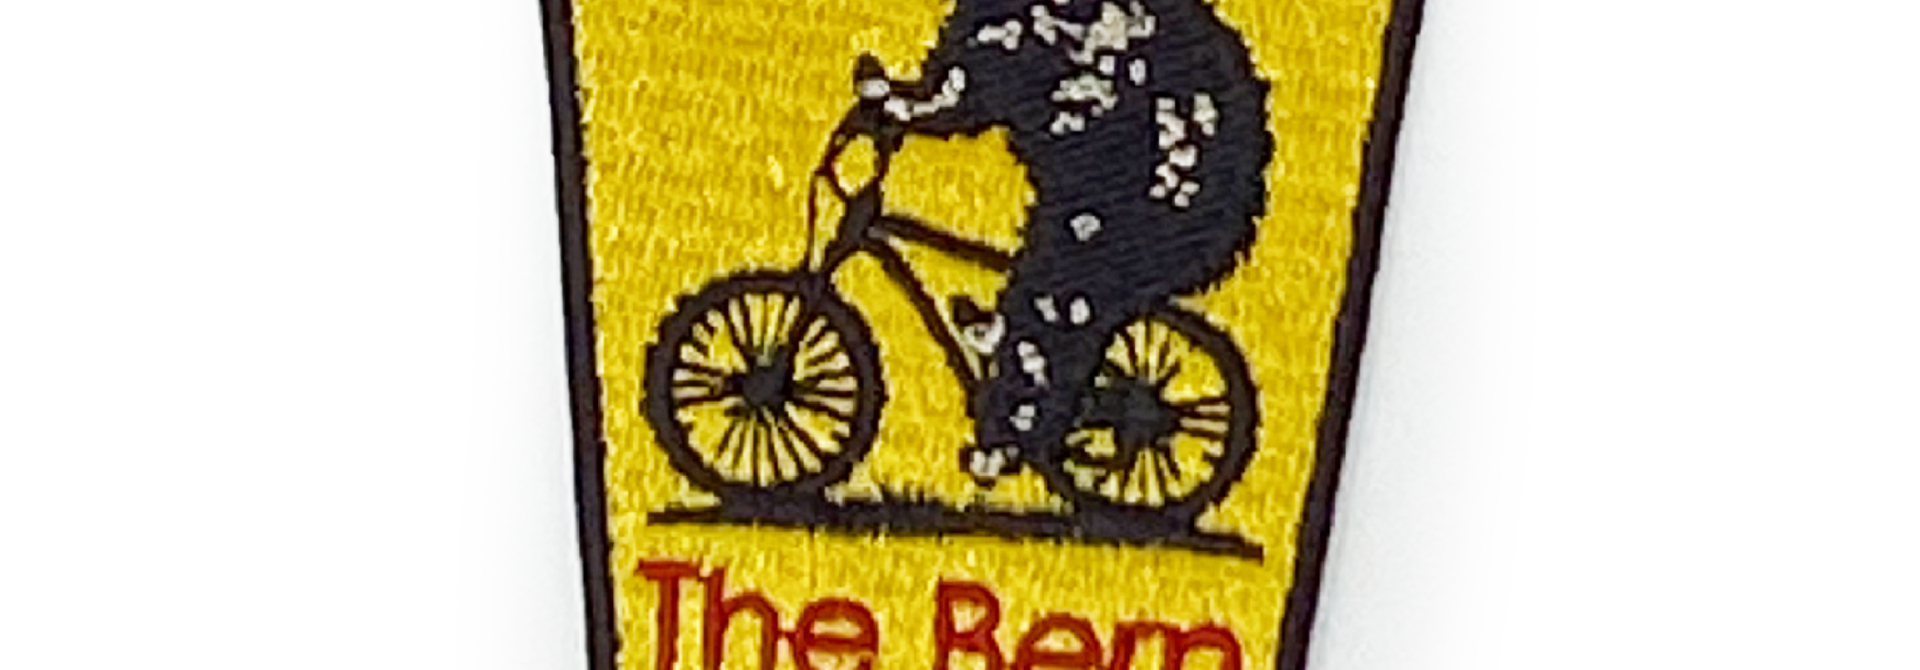 The Bern Pint Glass Embroidered Patch